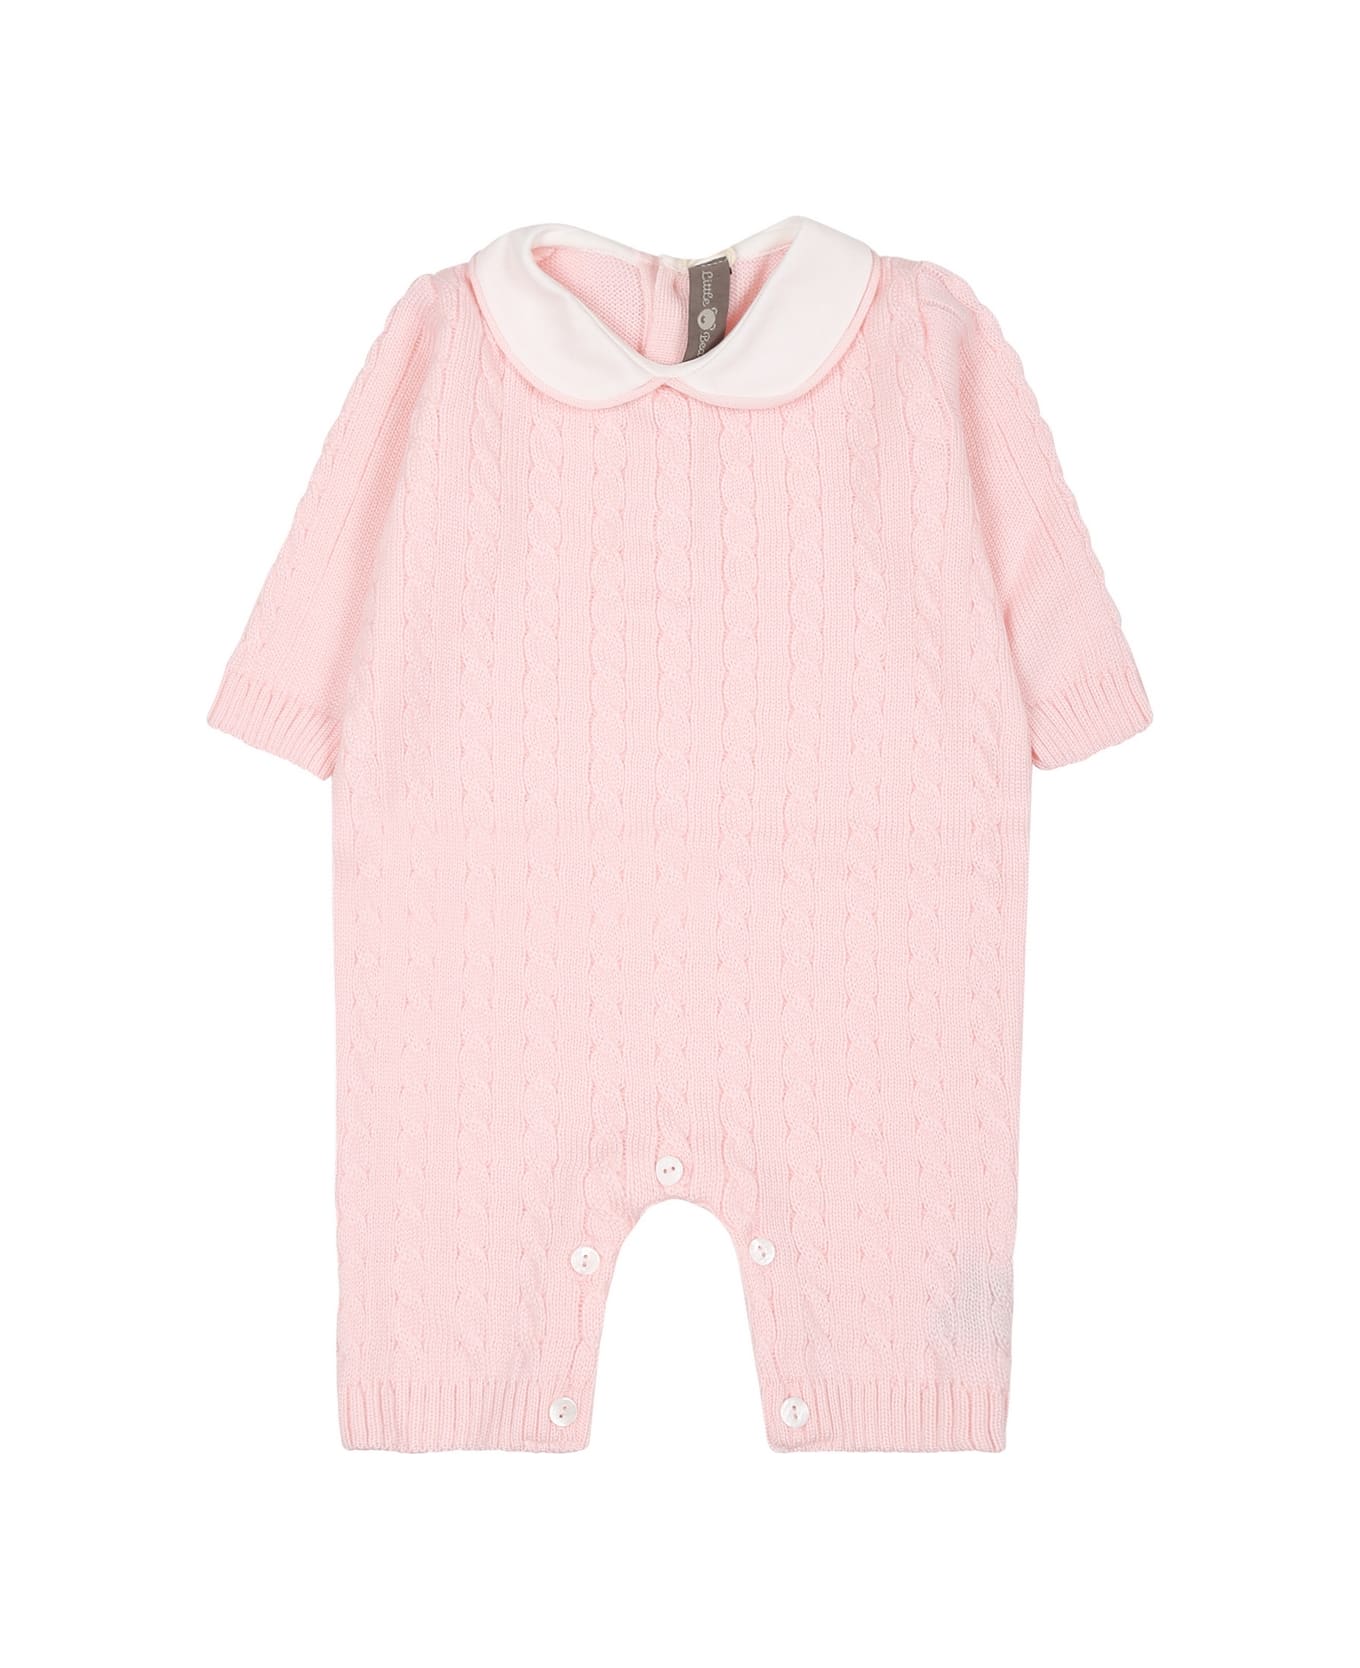 Little Bear Pink Babygrown For Baby Girl - Cipria